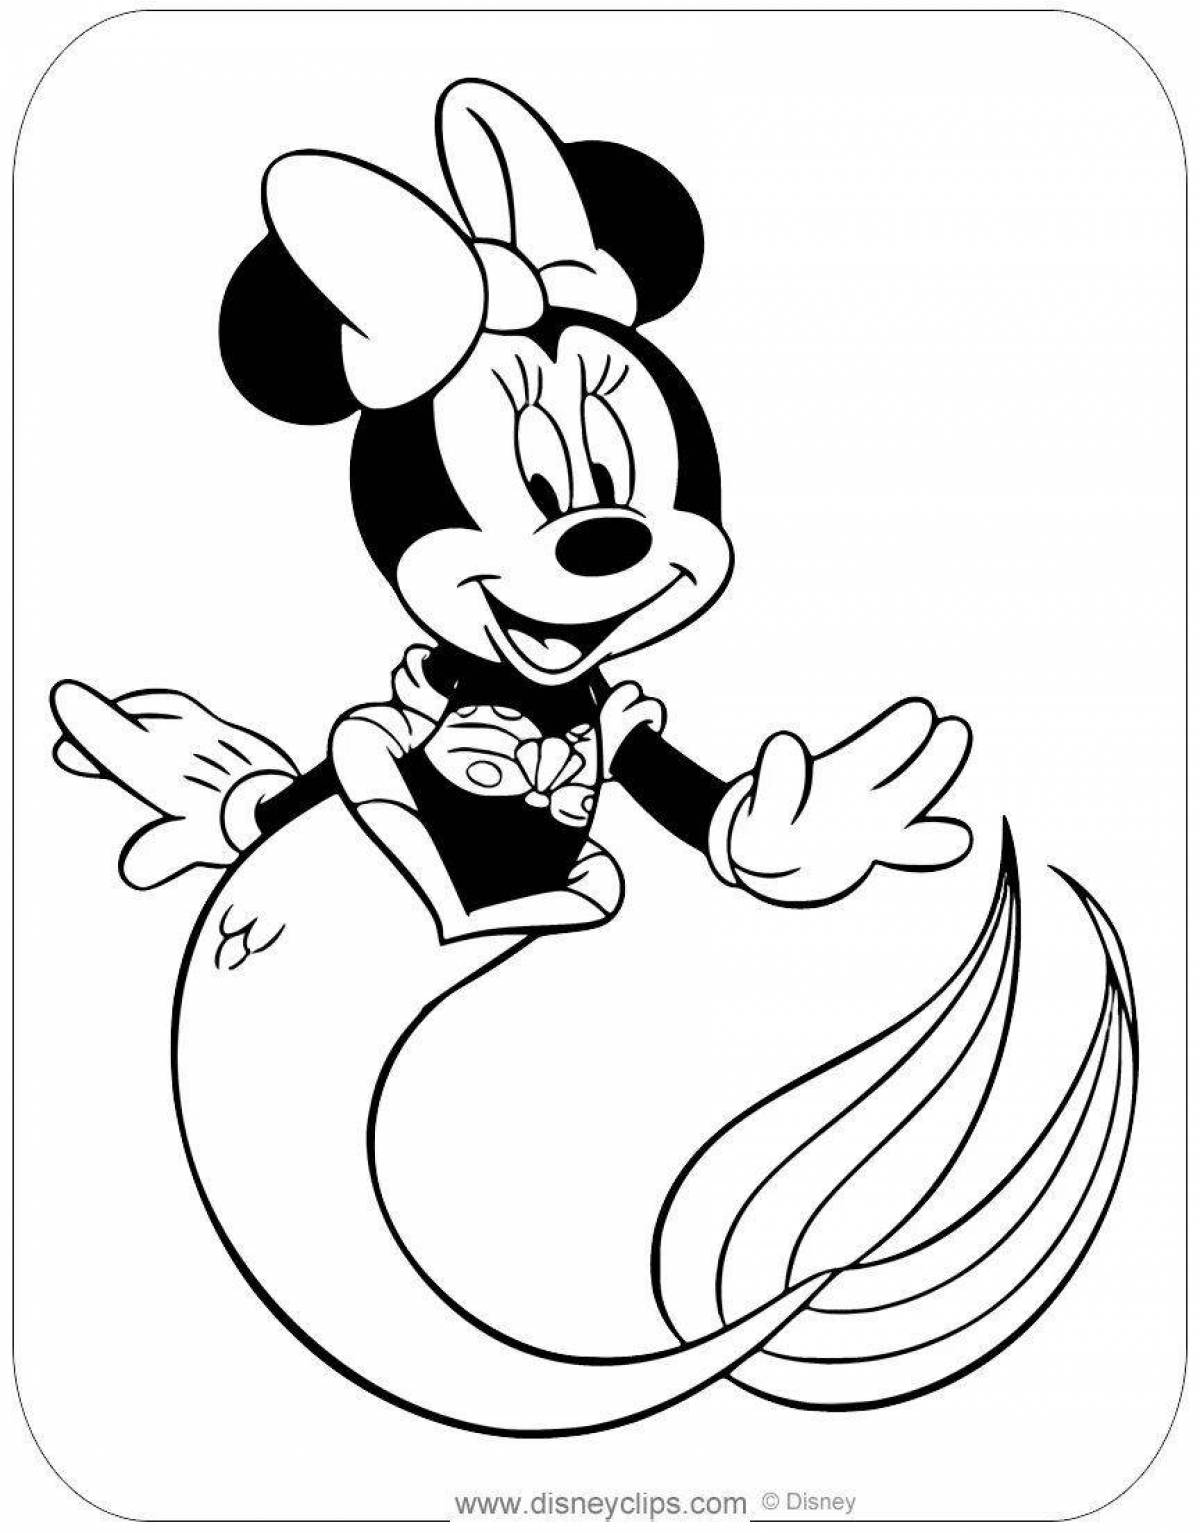 Minnie's nice coloring page